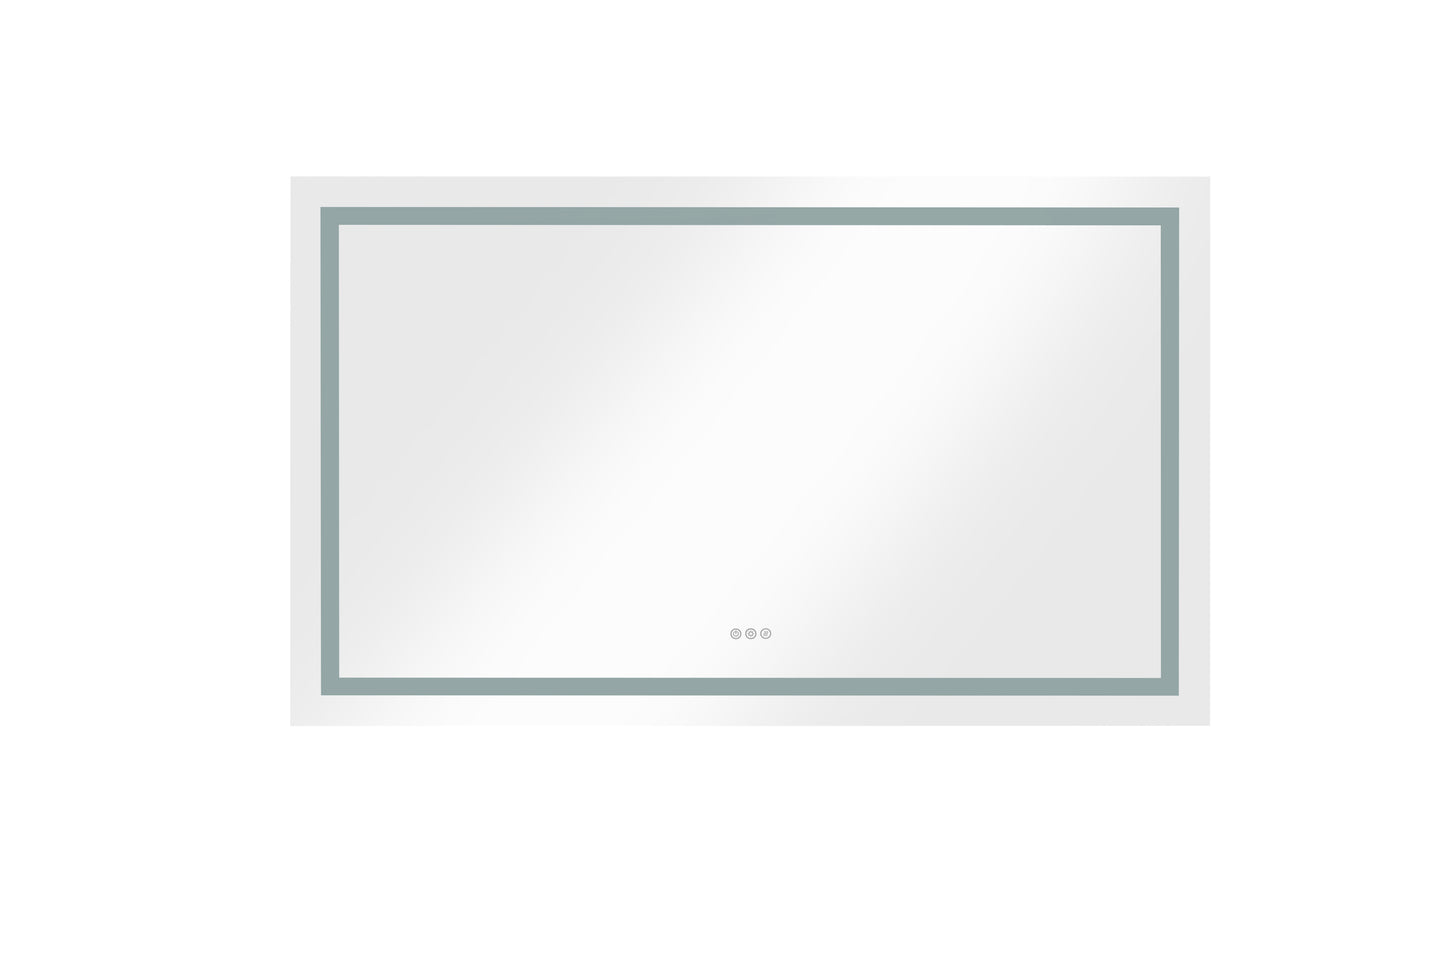 LTL needs to consult the warehouse address72 x 36 Inch LED Bathroom Mirror with Lights, Lighted Vanity Mirror, Anti Fog Design , Large Wall Mounted Light Up Mirror , Hanging, Rectangle